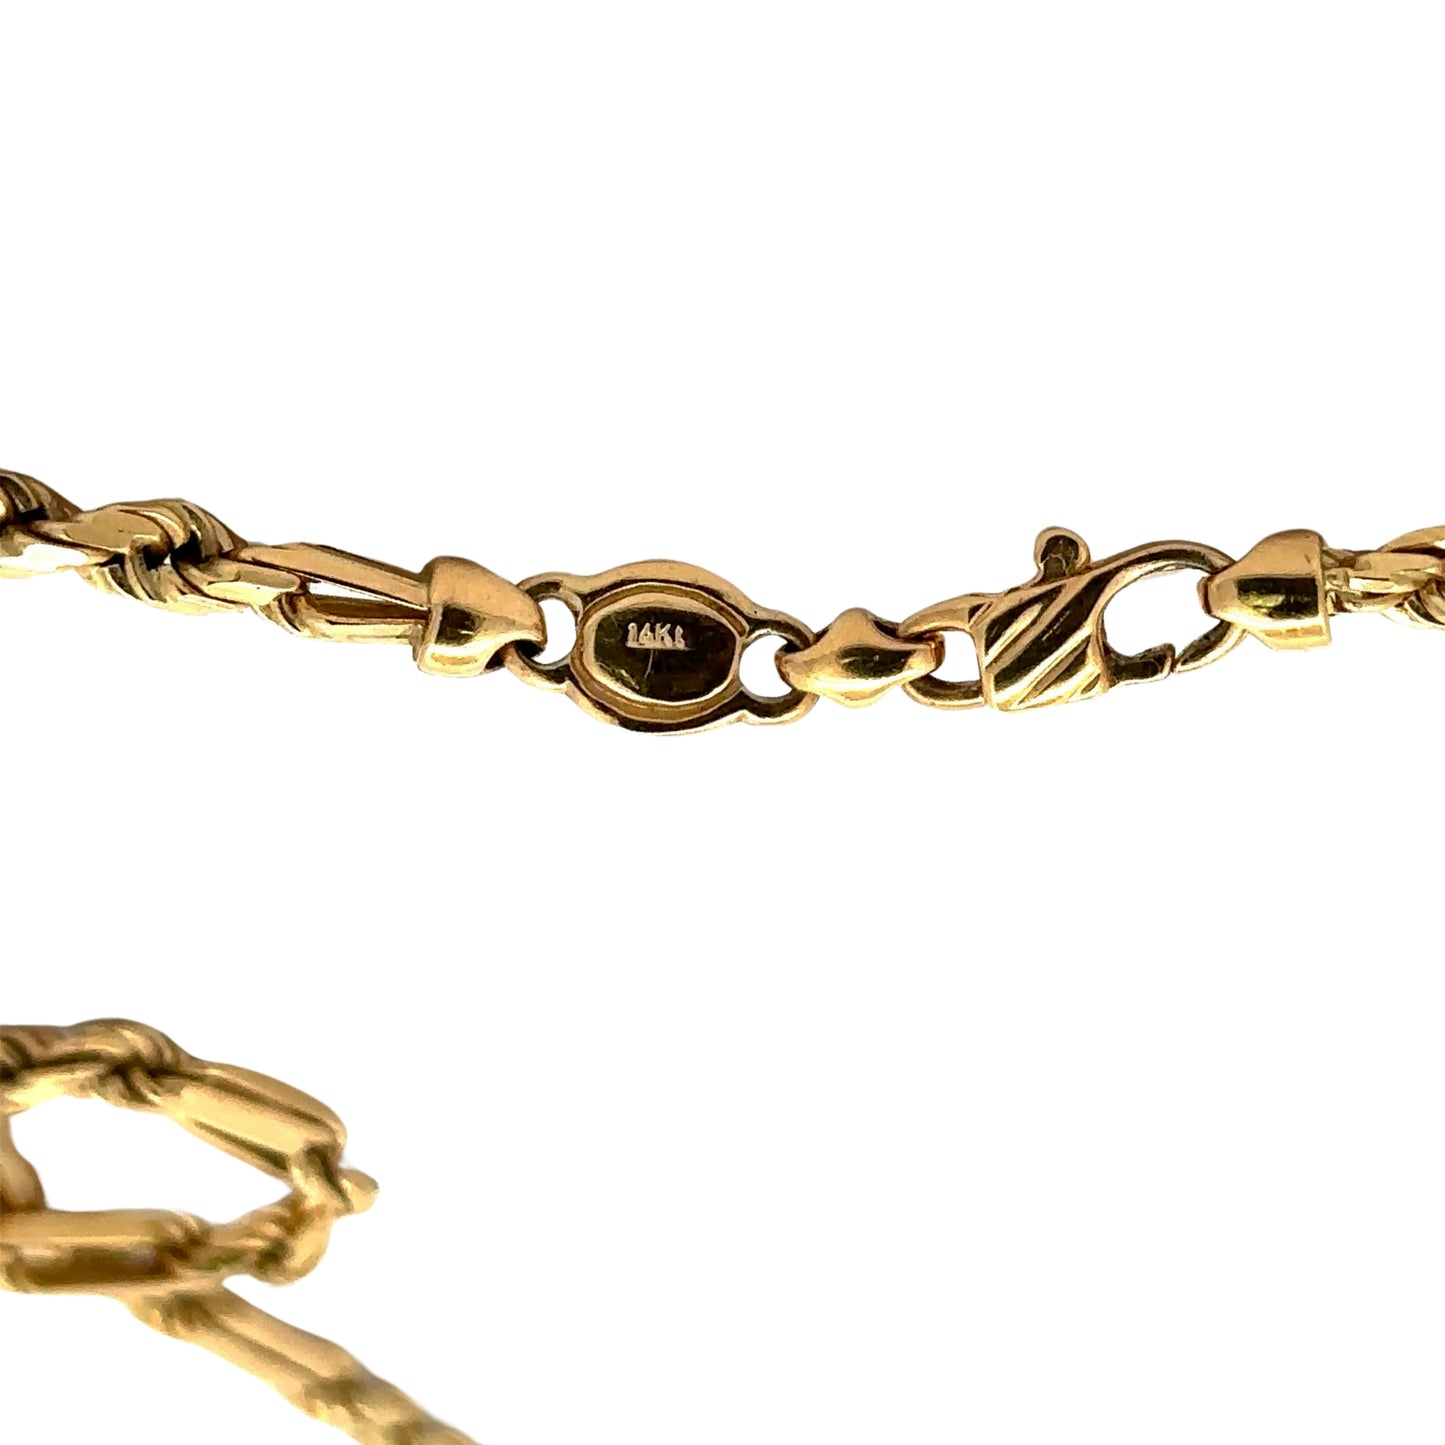 14K stamp on clasp of chain